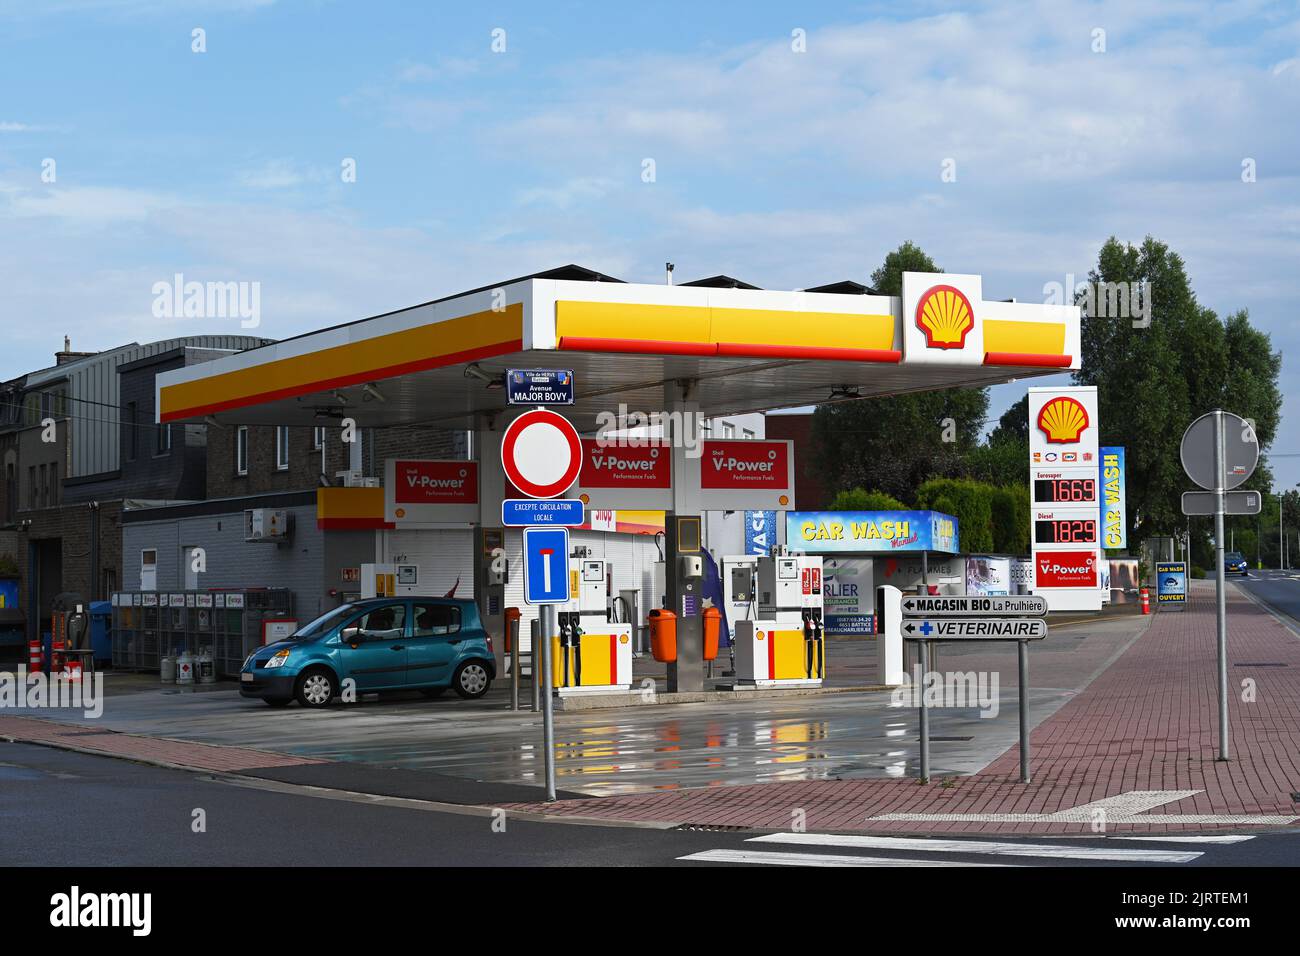 A Shell filling station in Belgium Stock Photo